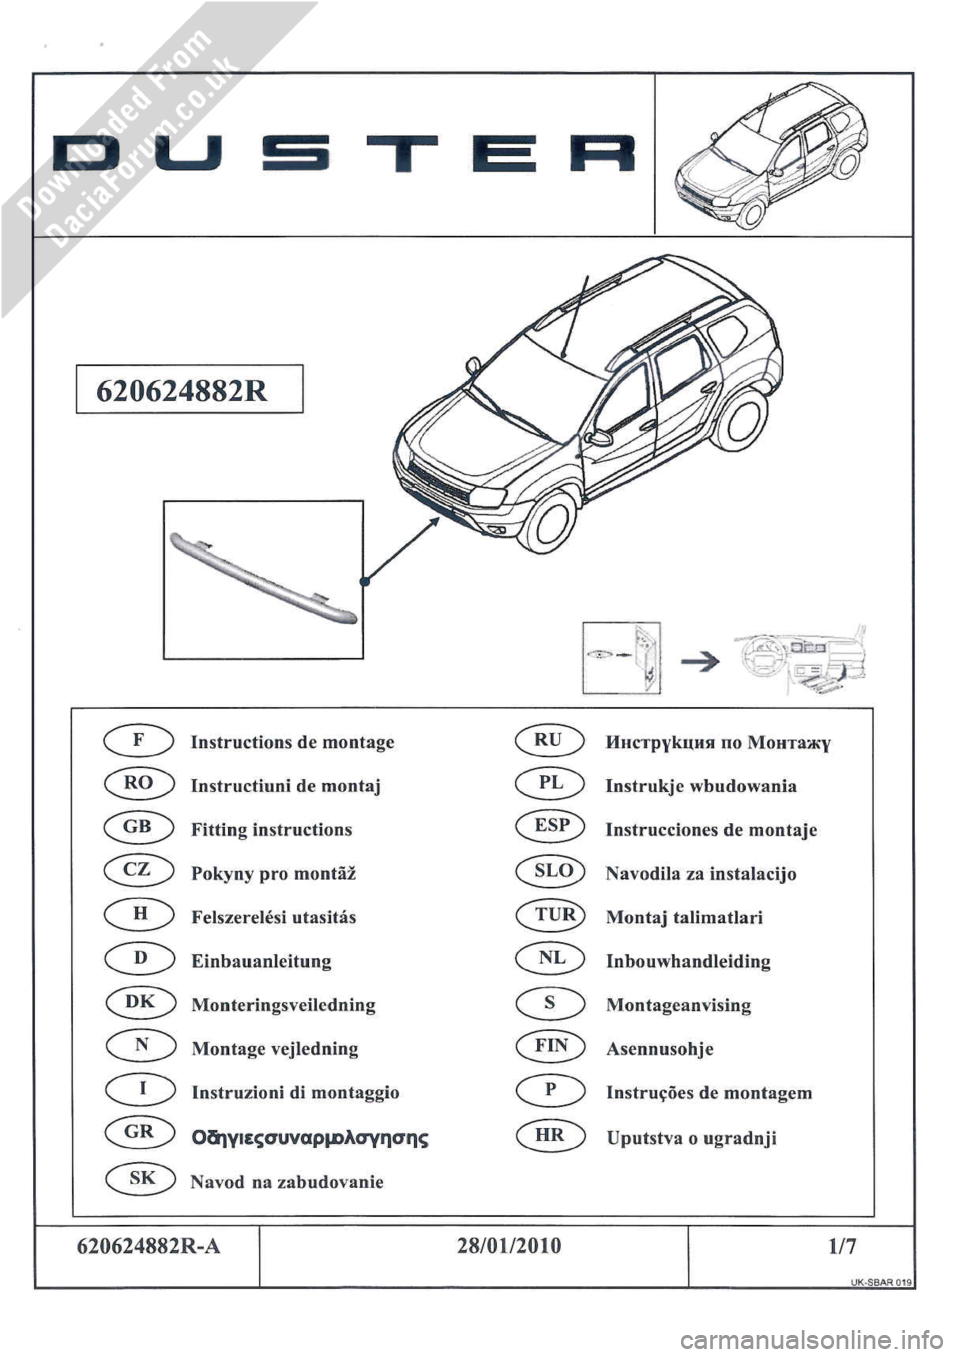 DACIA DUSTER 2010 1.G Front Styling Bar Fitting Guide Workshop Manual 